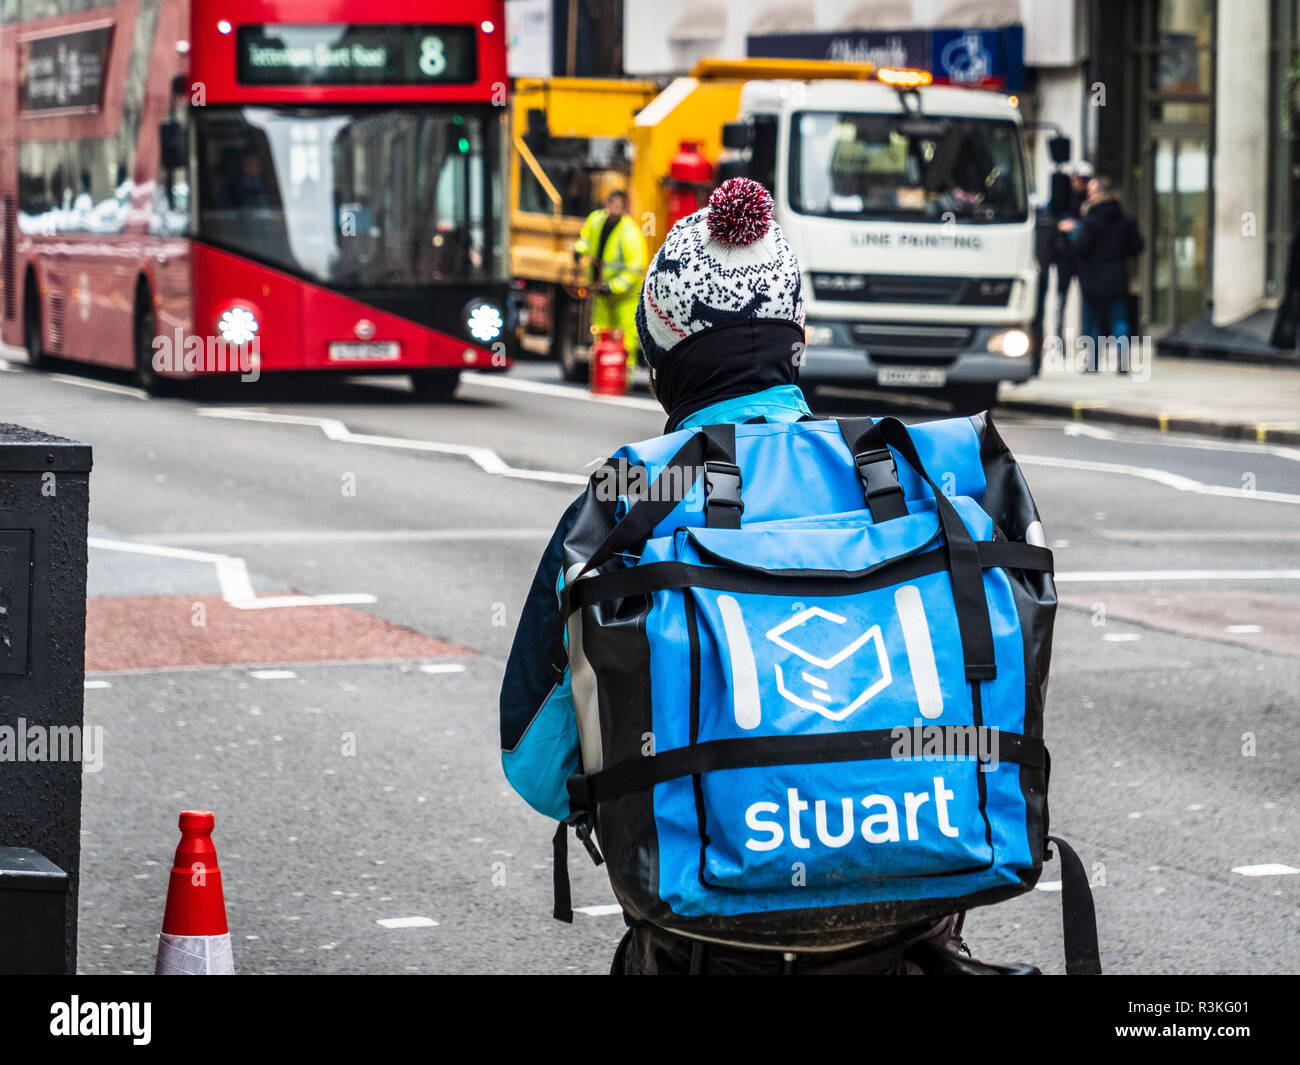 A Stuart company food delivery courier rides through London Streets, Stuart is competing with Deliveroo and Uber Eats in this competitive market Stock Photo